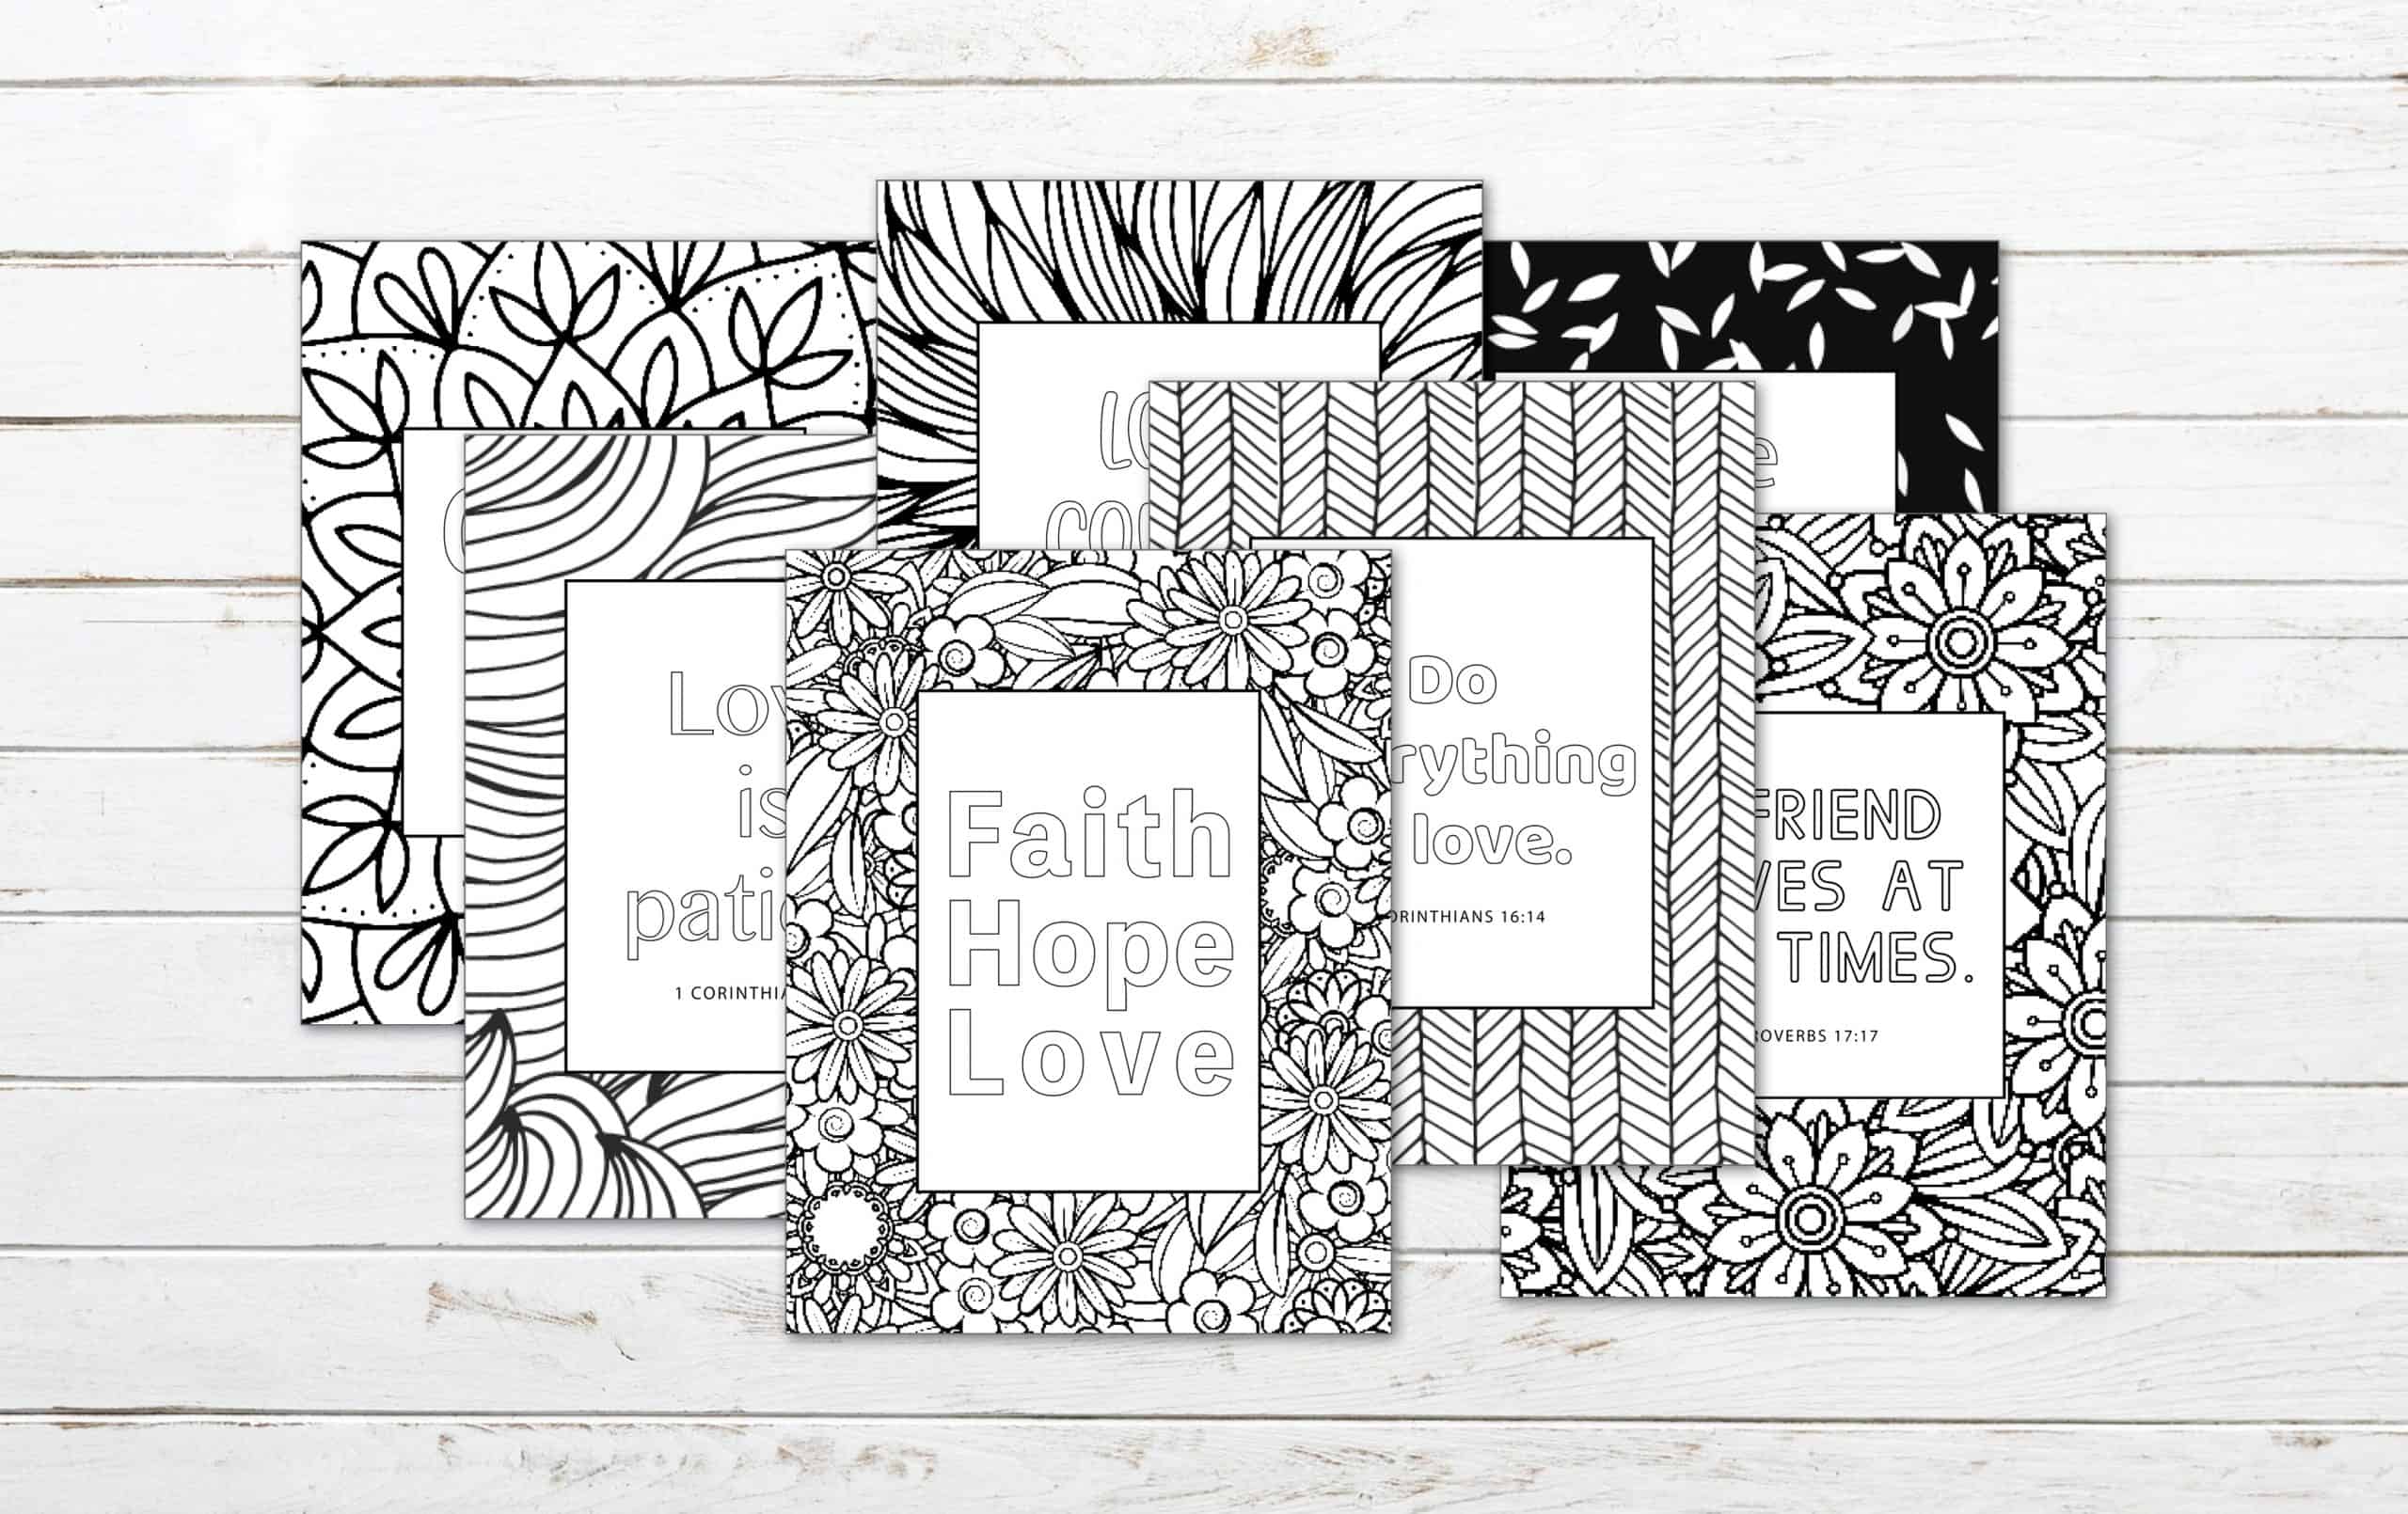 7 Printable Bible Verse Coloring Pages on Love